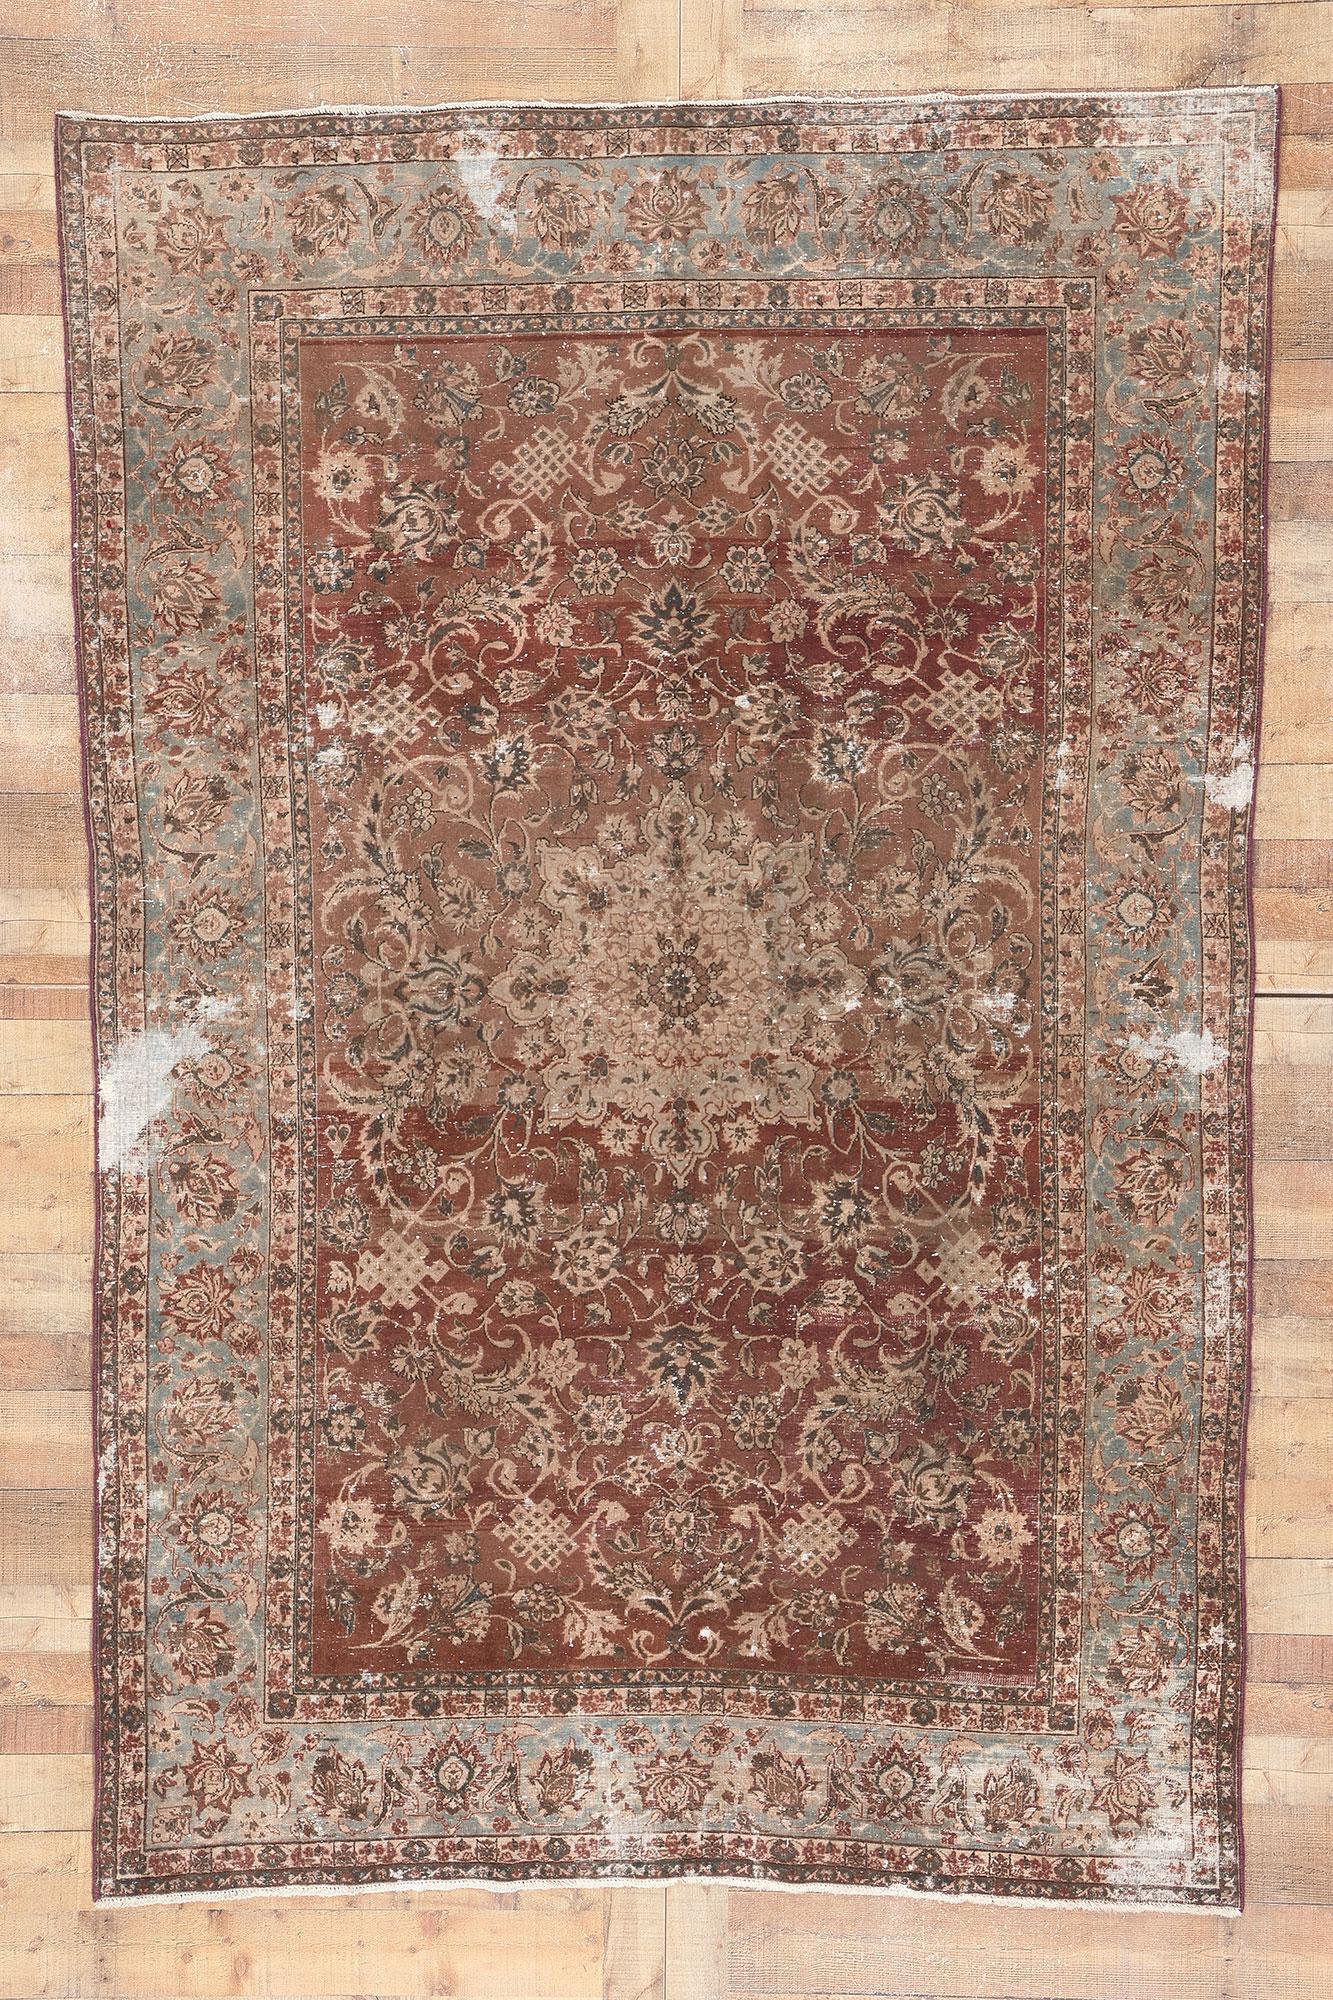 Distressed Antique Persian Tabriz Rug with Rustic Earth-Tone Colors For Sale 3